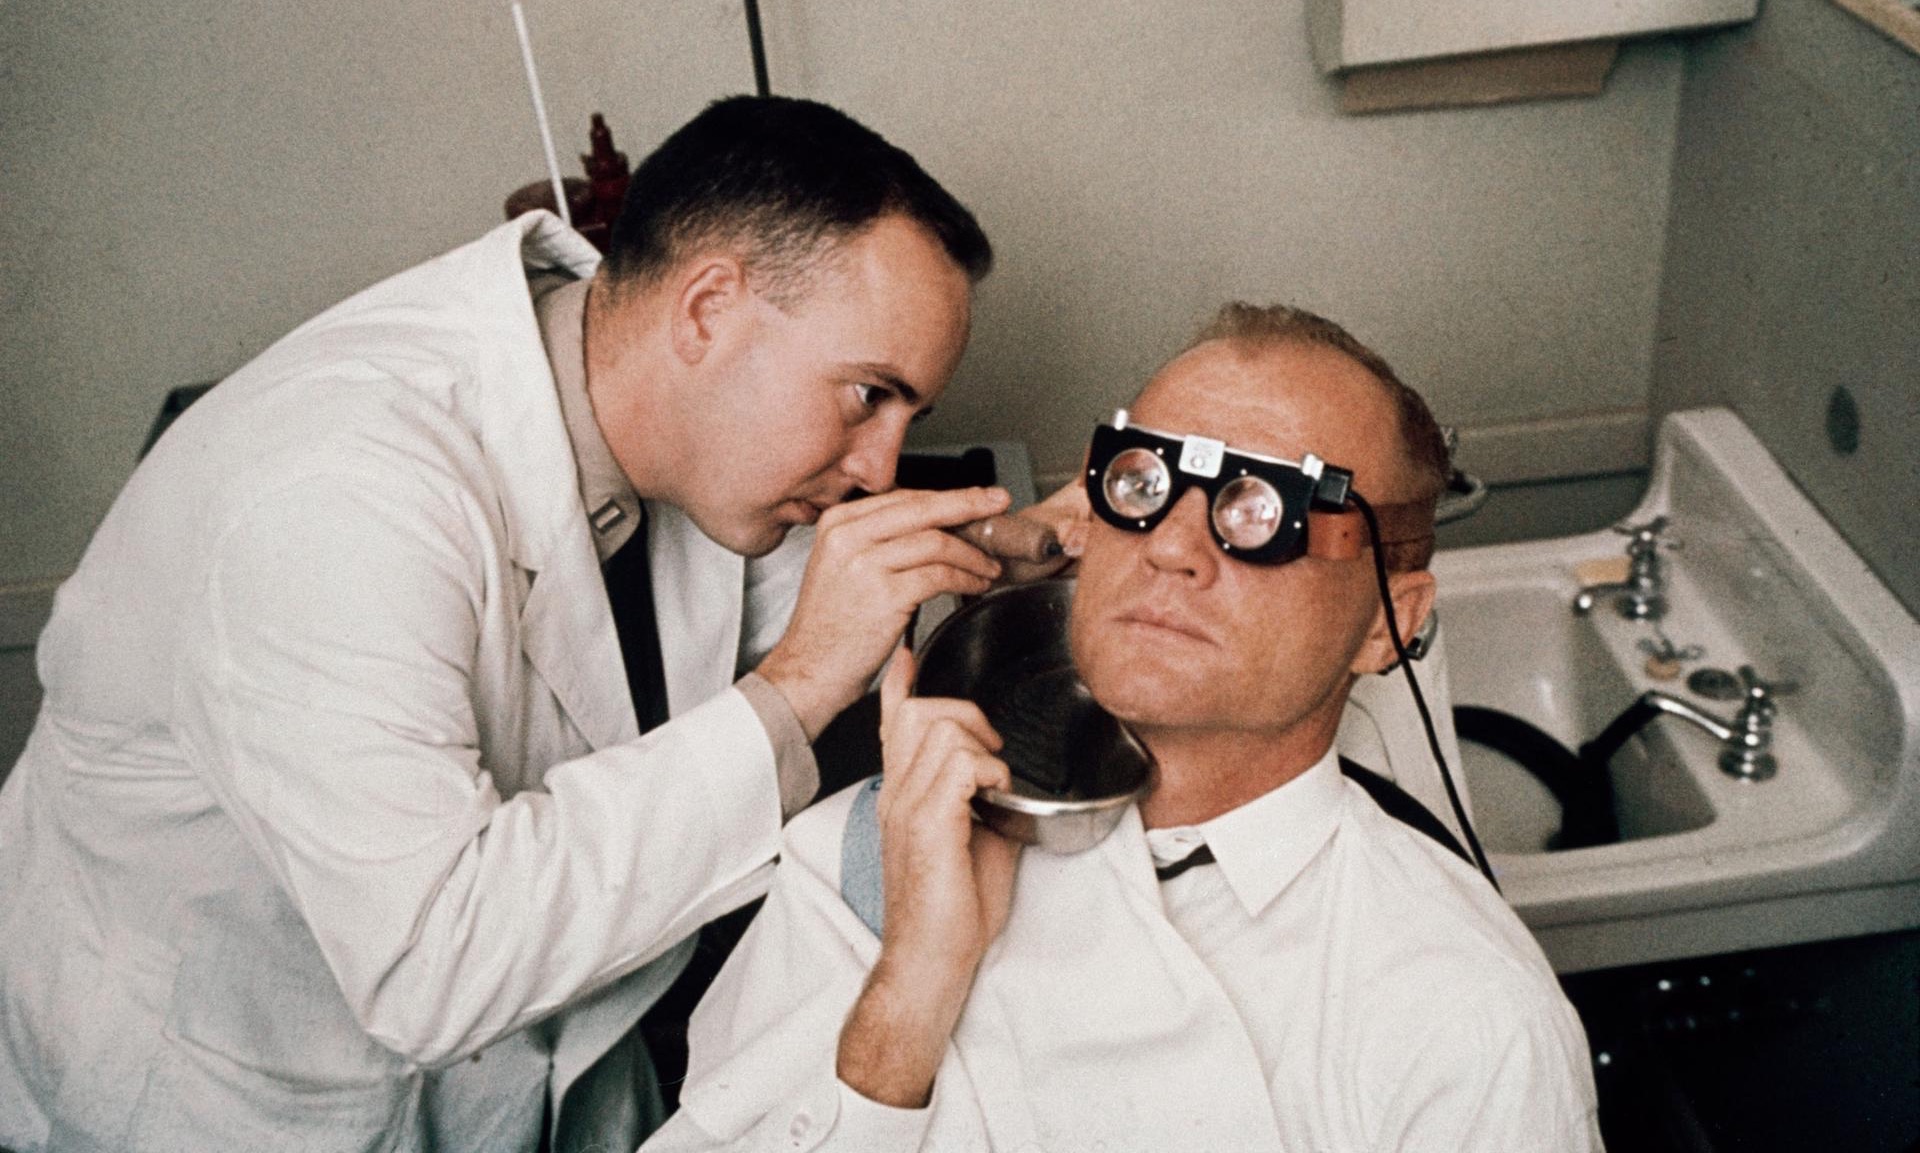 a man looks into the ear of a man with thick glasses on